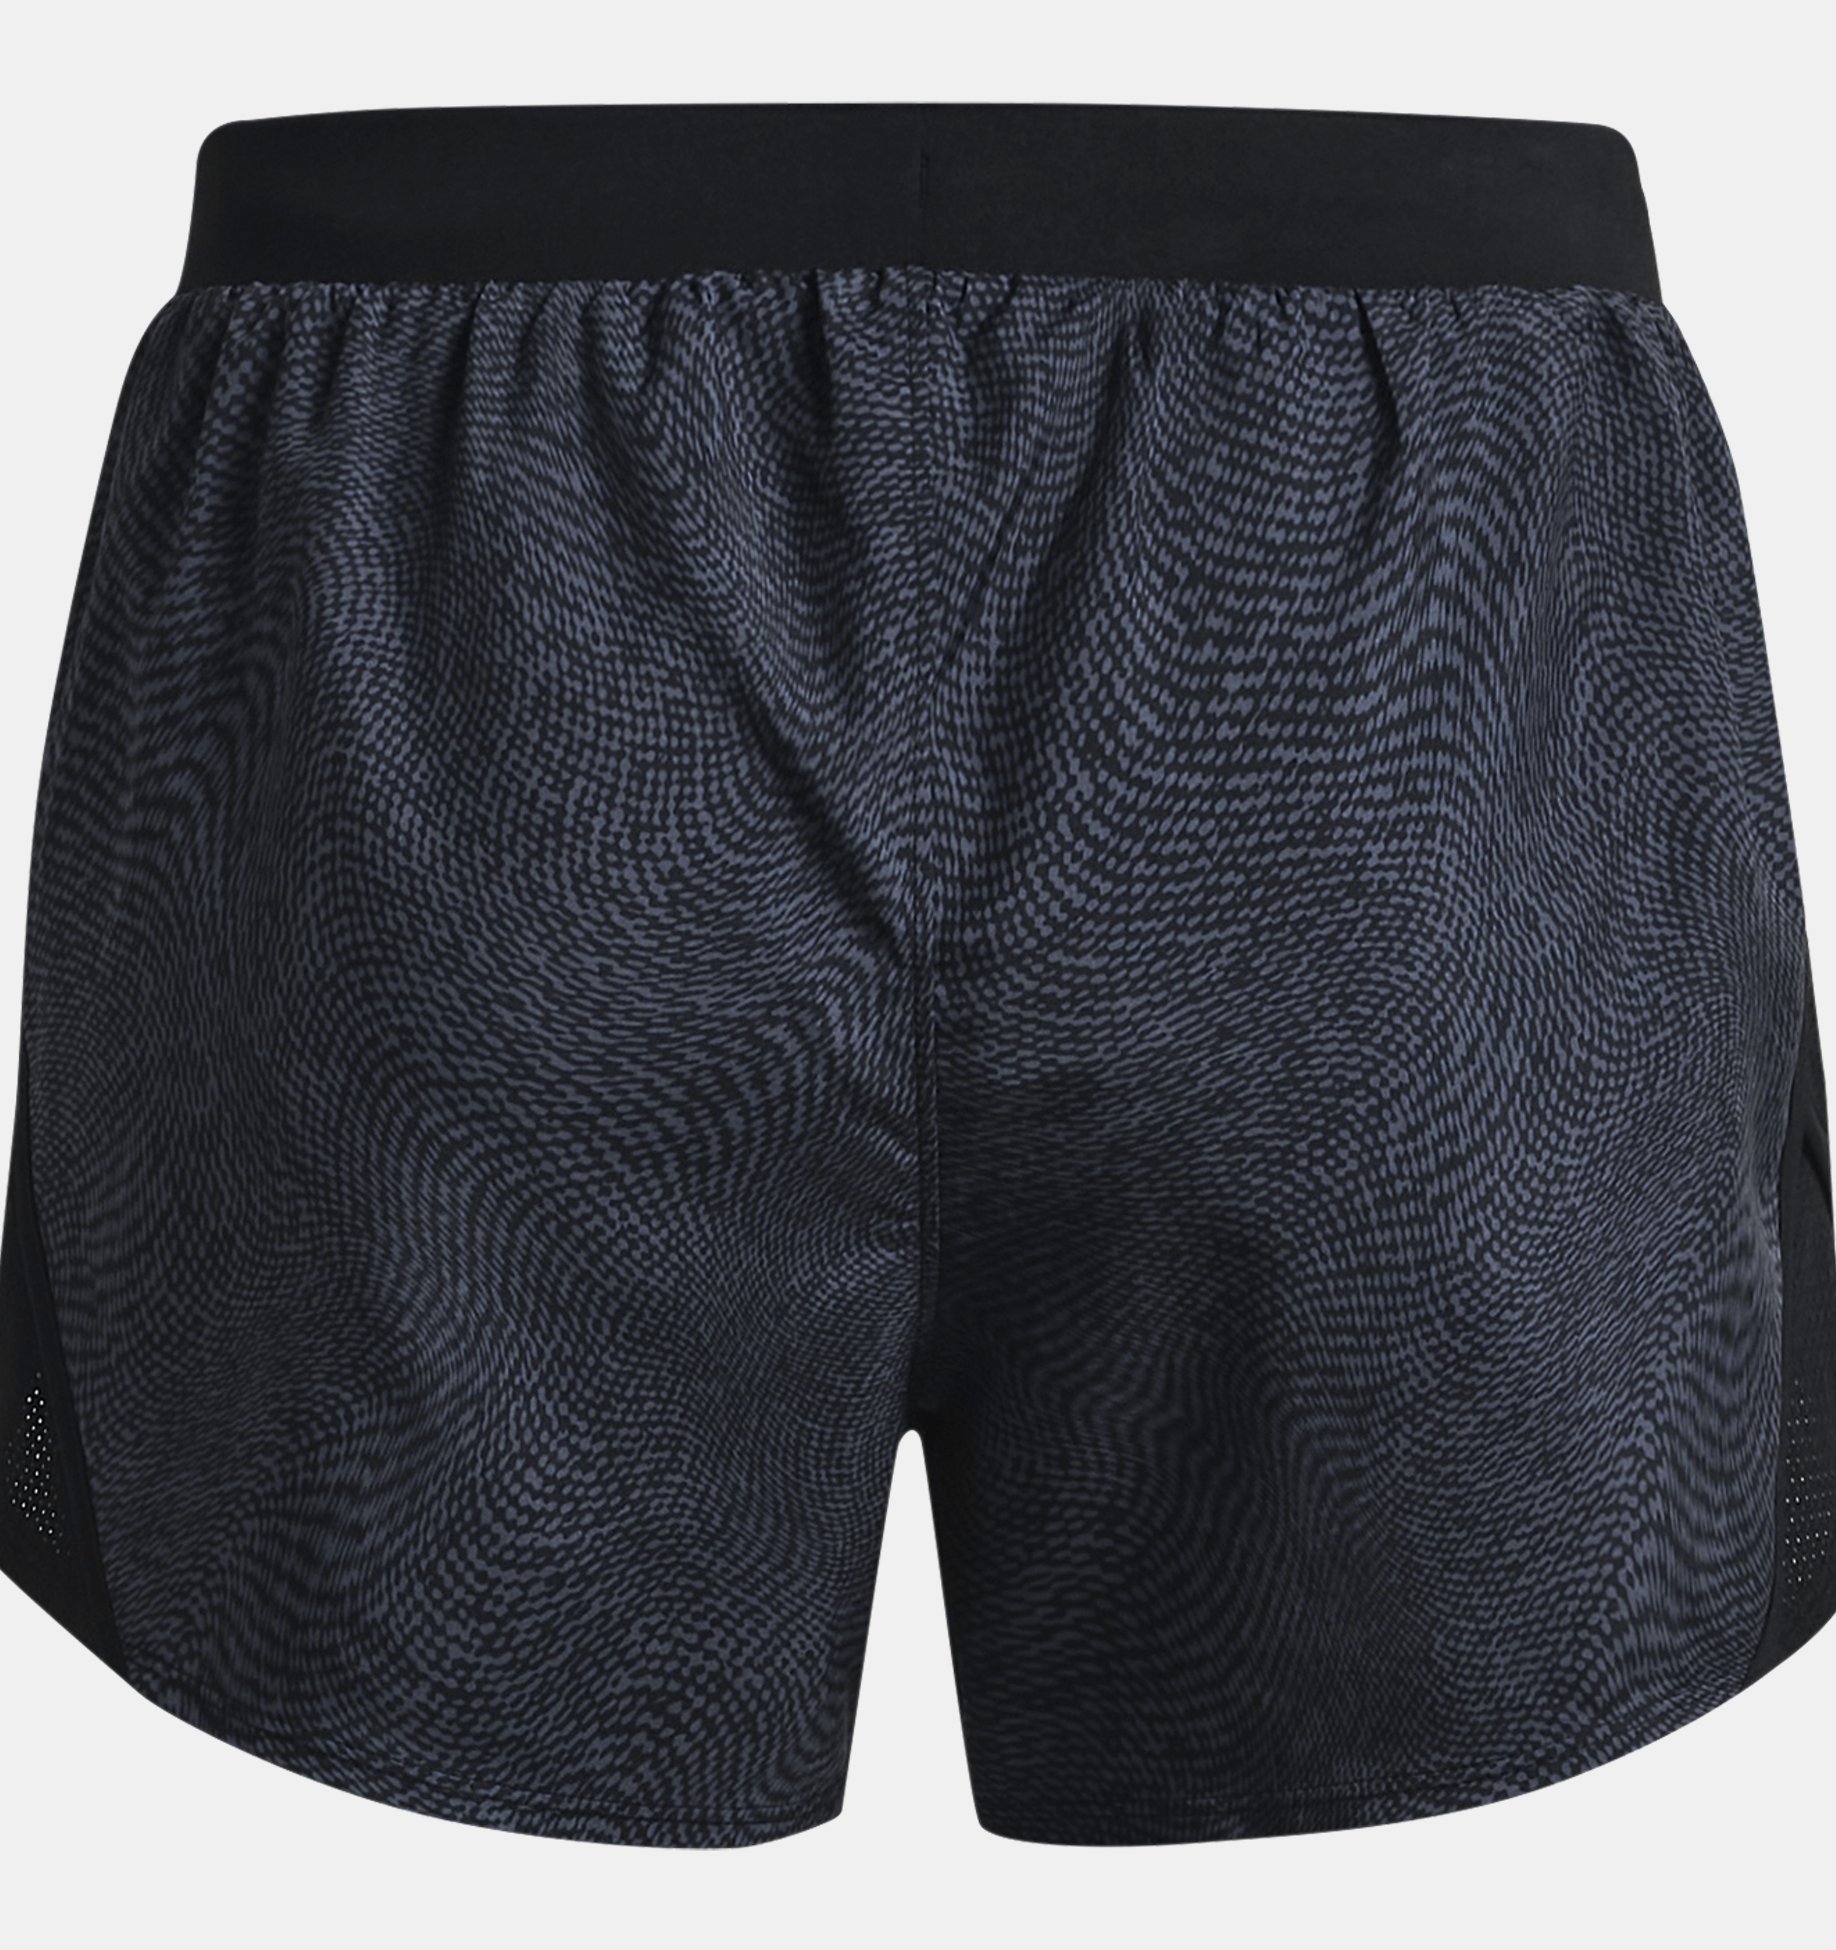 Under Armour Women's Black/White Fly By 2.0 Shorts